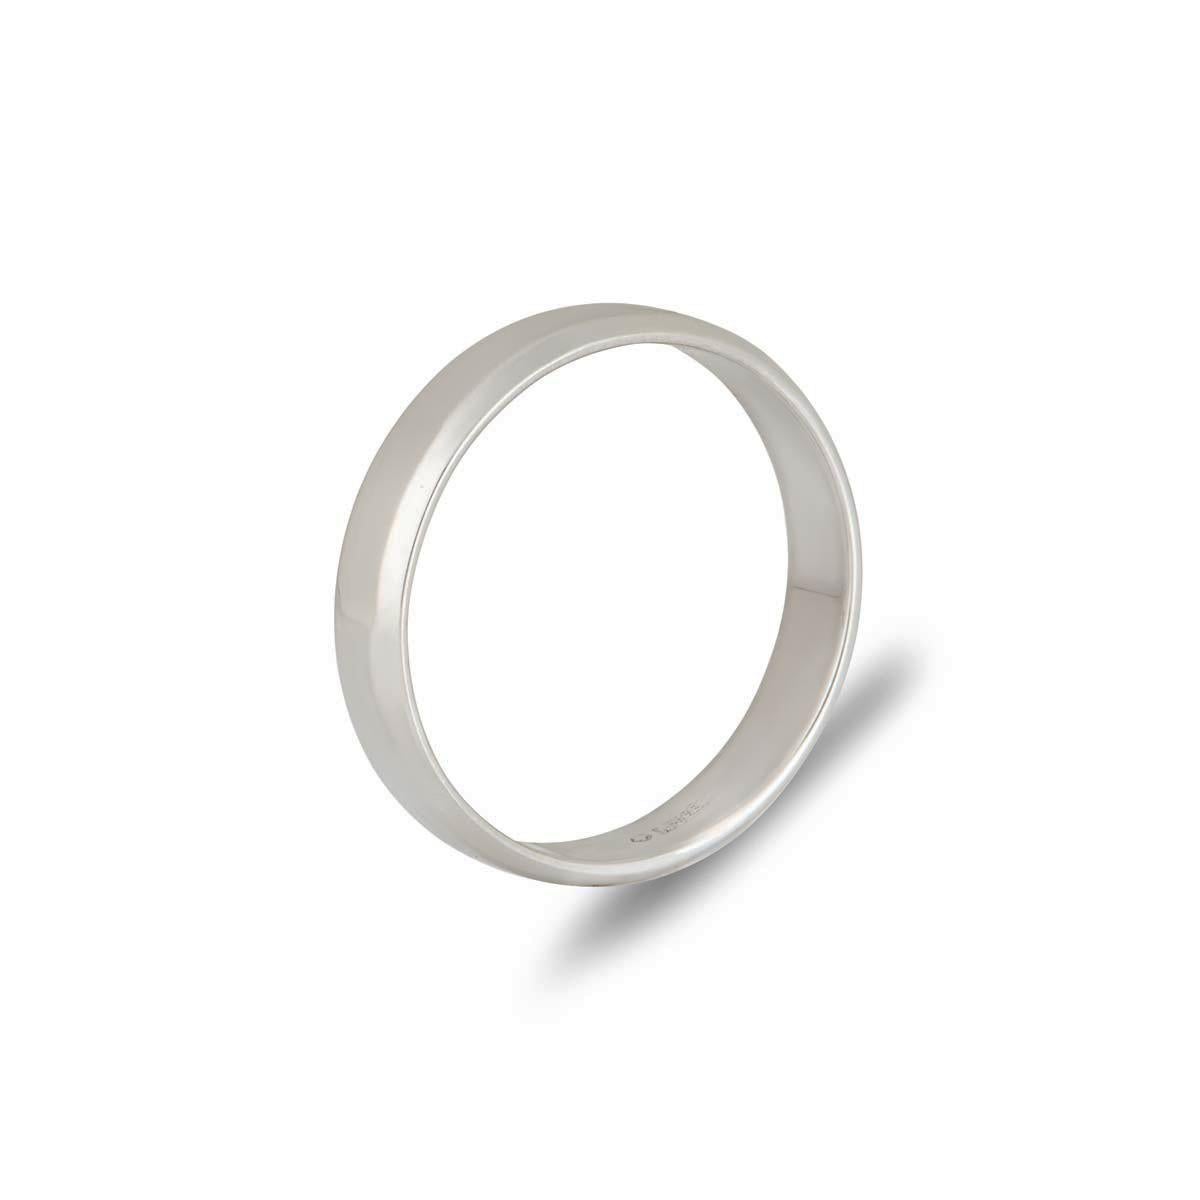 A contemporary platinum wedding band. The band measures 4mm in width, features a bevelled edge and displays a high polish finish. The ring has a gross weight of 4.15 grams and is currently a size UK M½ - EU 52½ but can be adjusted for the perfect